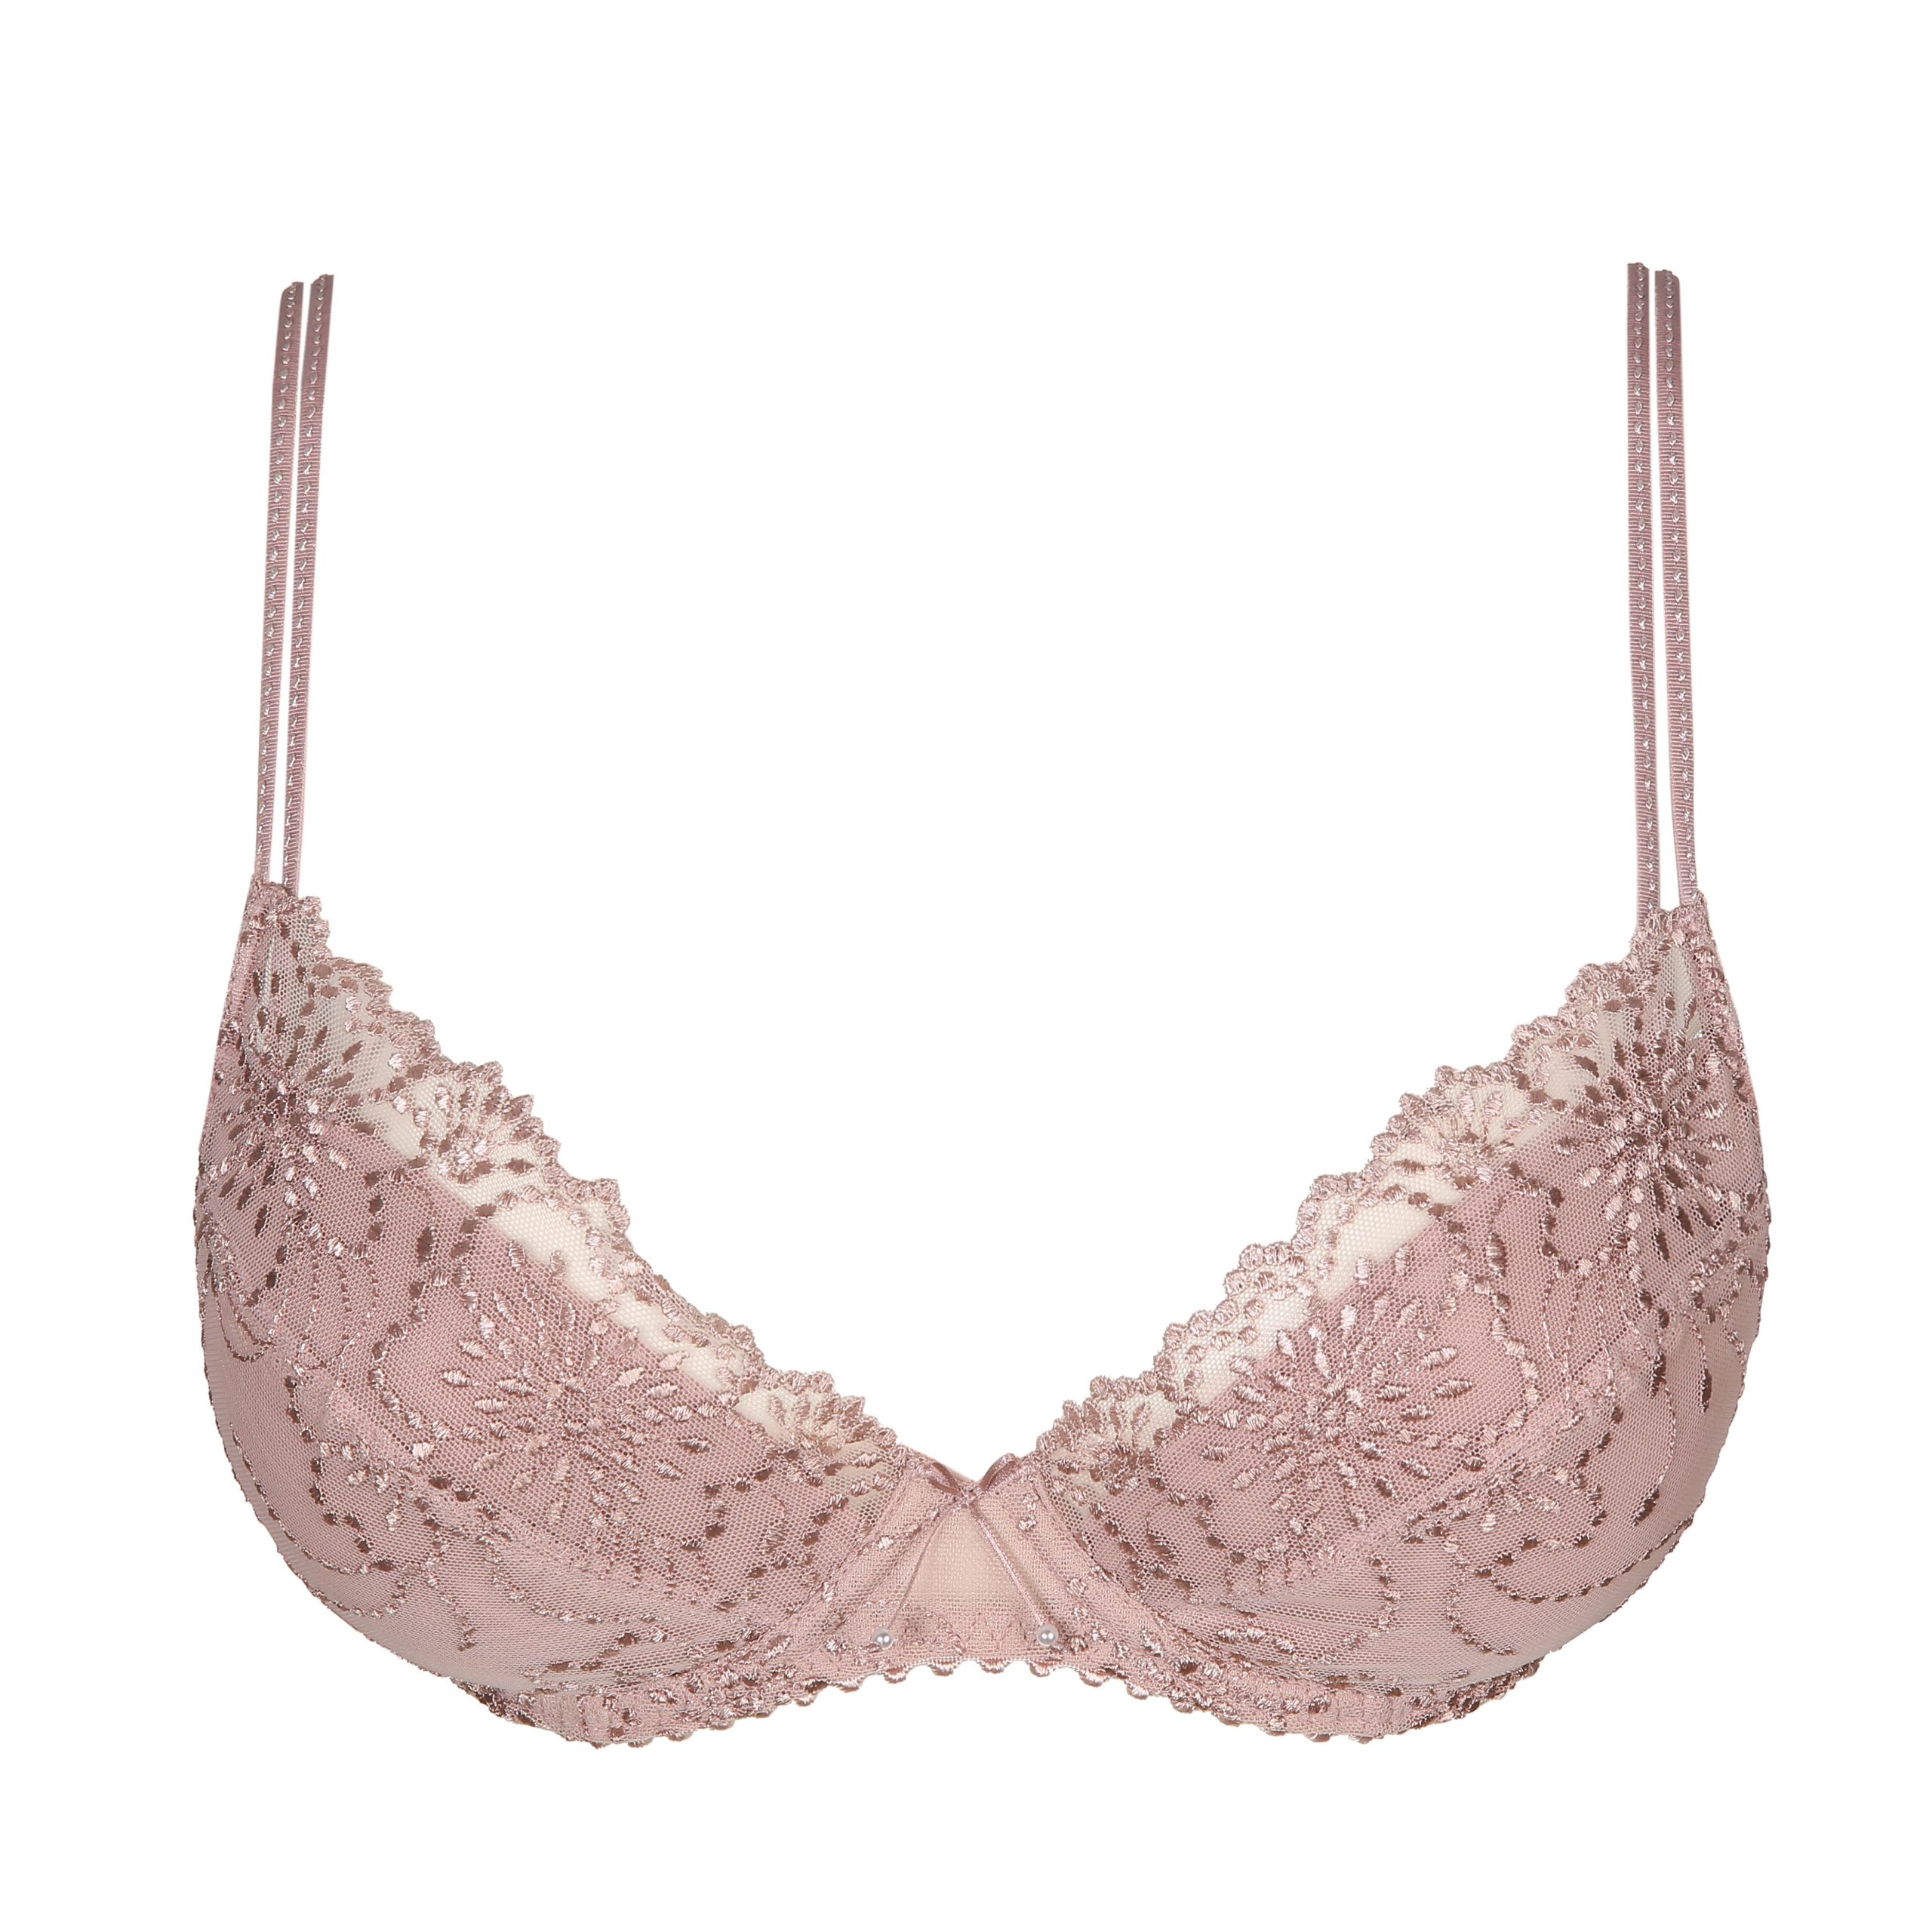 WOMENS 30-42 AA A B C Cup Push Up Lace Bras Bralette Underwire